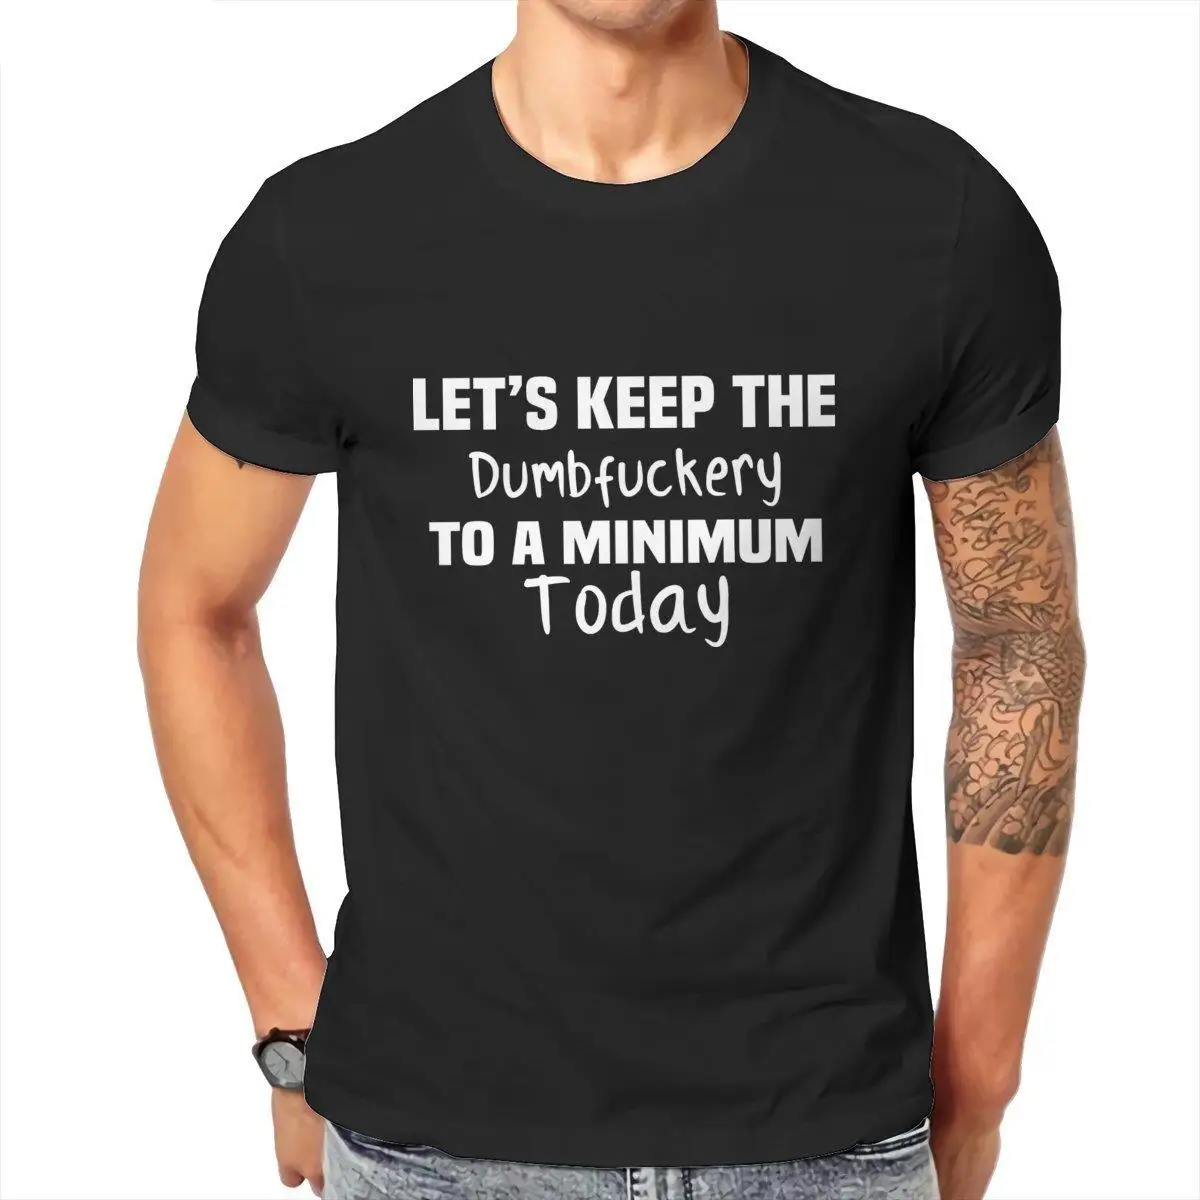 

Wholesale Let’s Keep the Dumbfuckery to A Minimum Today 100% Cotton Funny Sleeve Streetwear Round Collar Men Clothing 194437